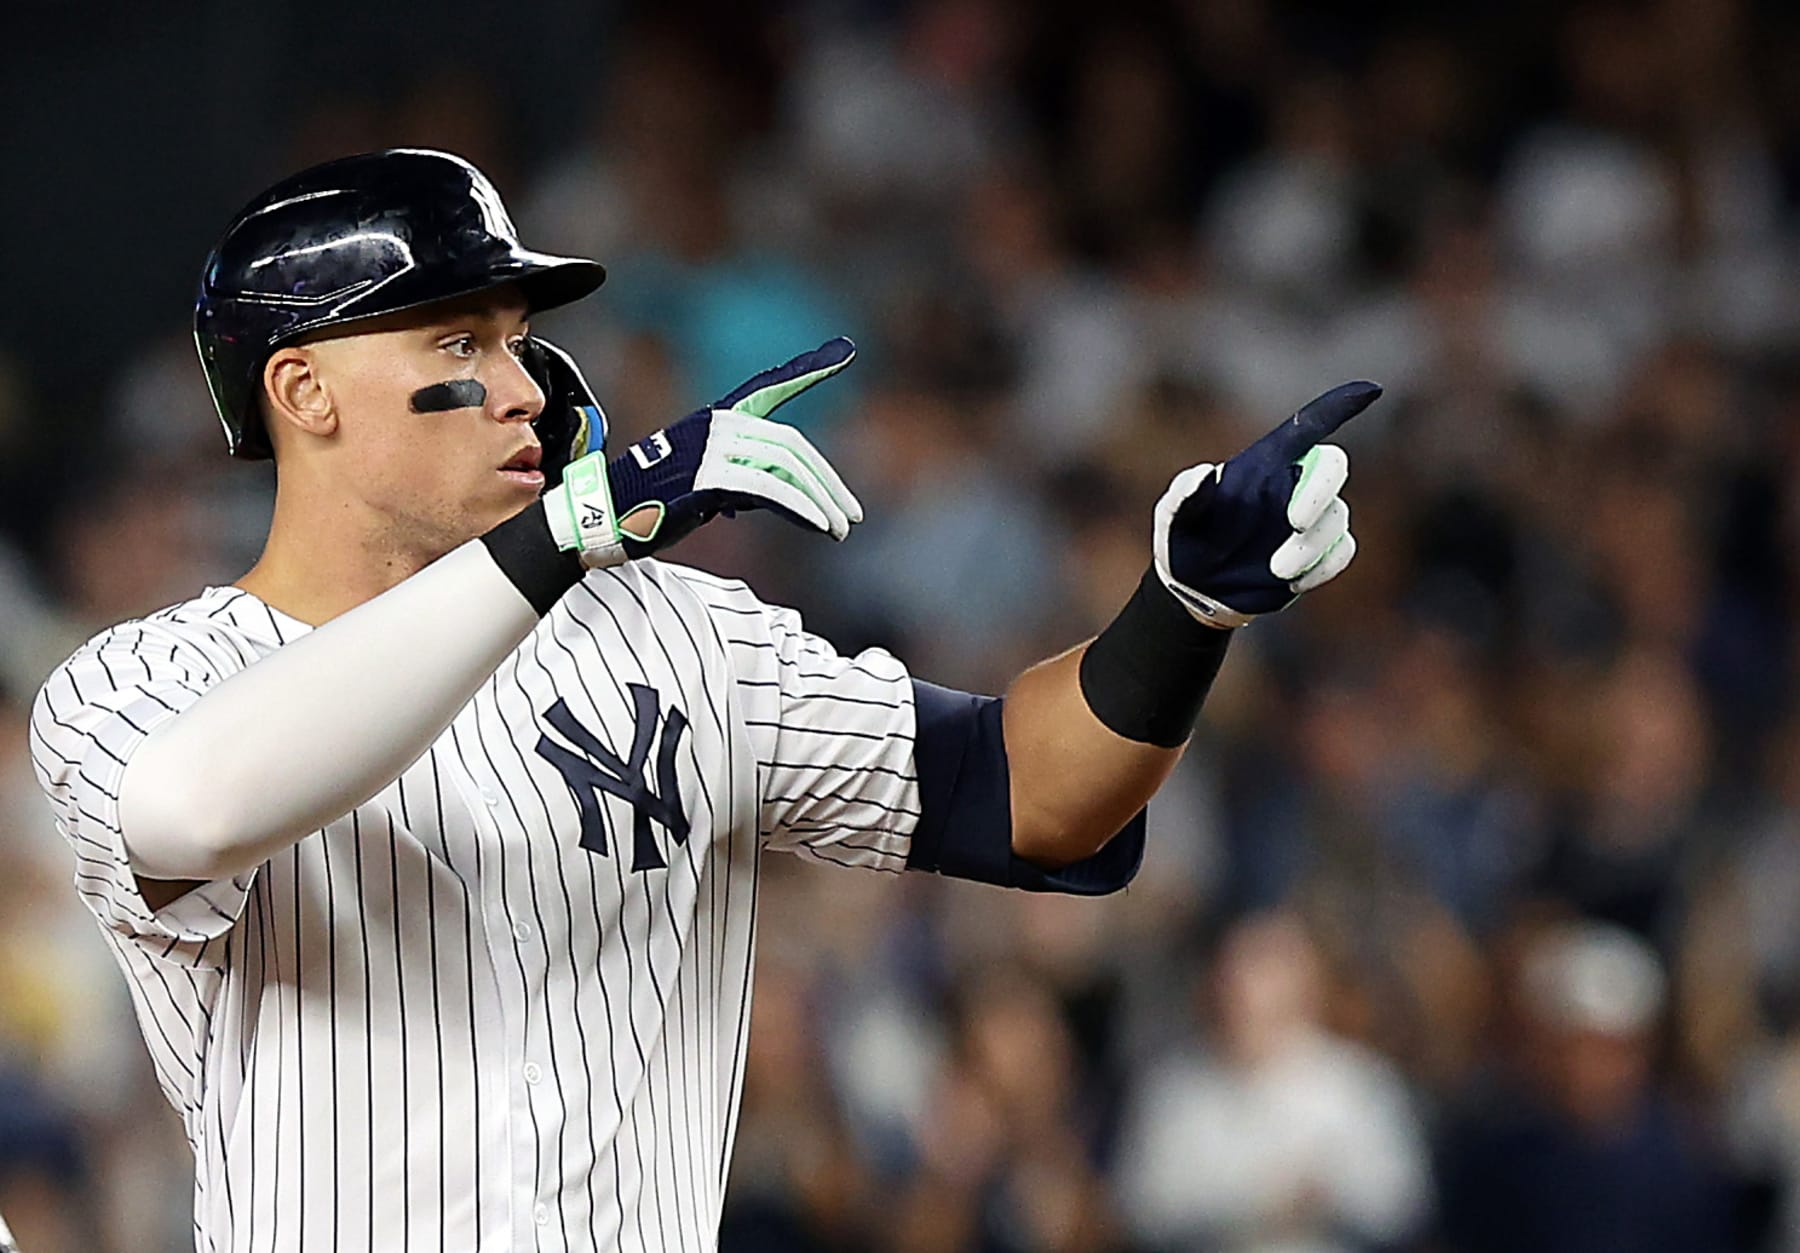 Chasing Ghosts: Aaron Judge and 62 home runs - Pinstripe Alley